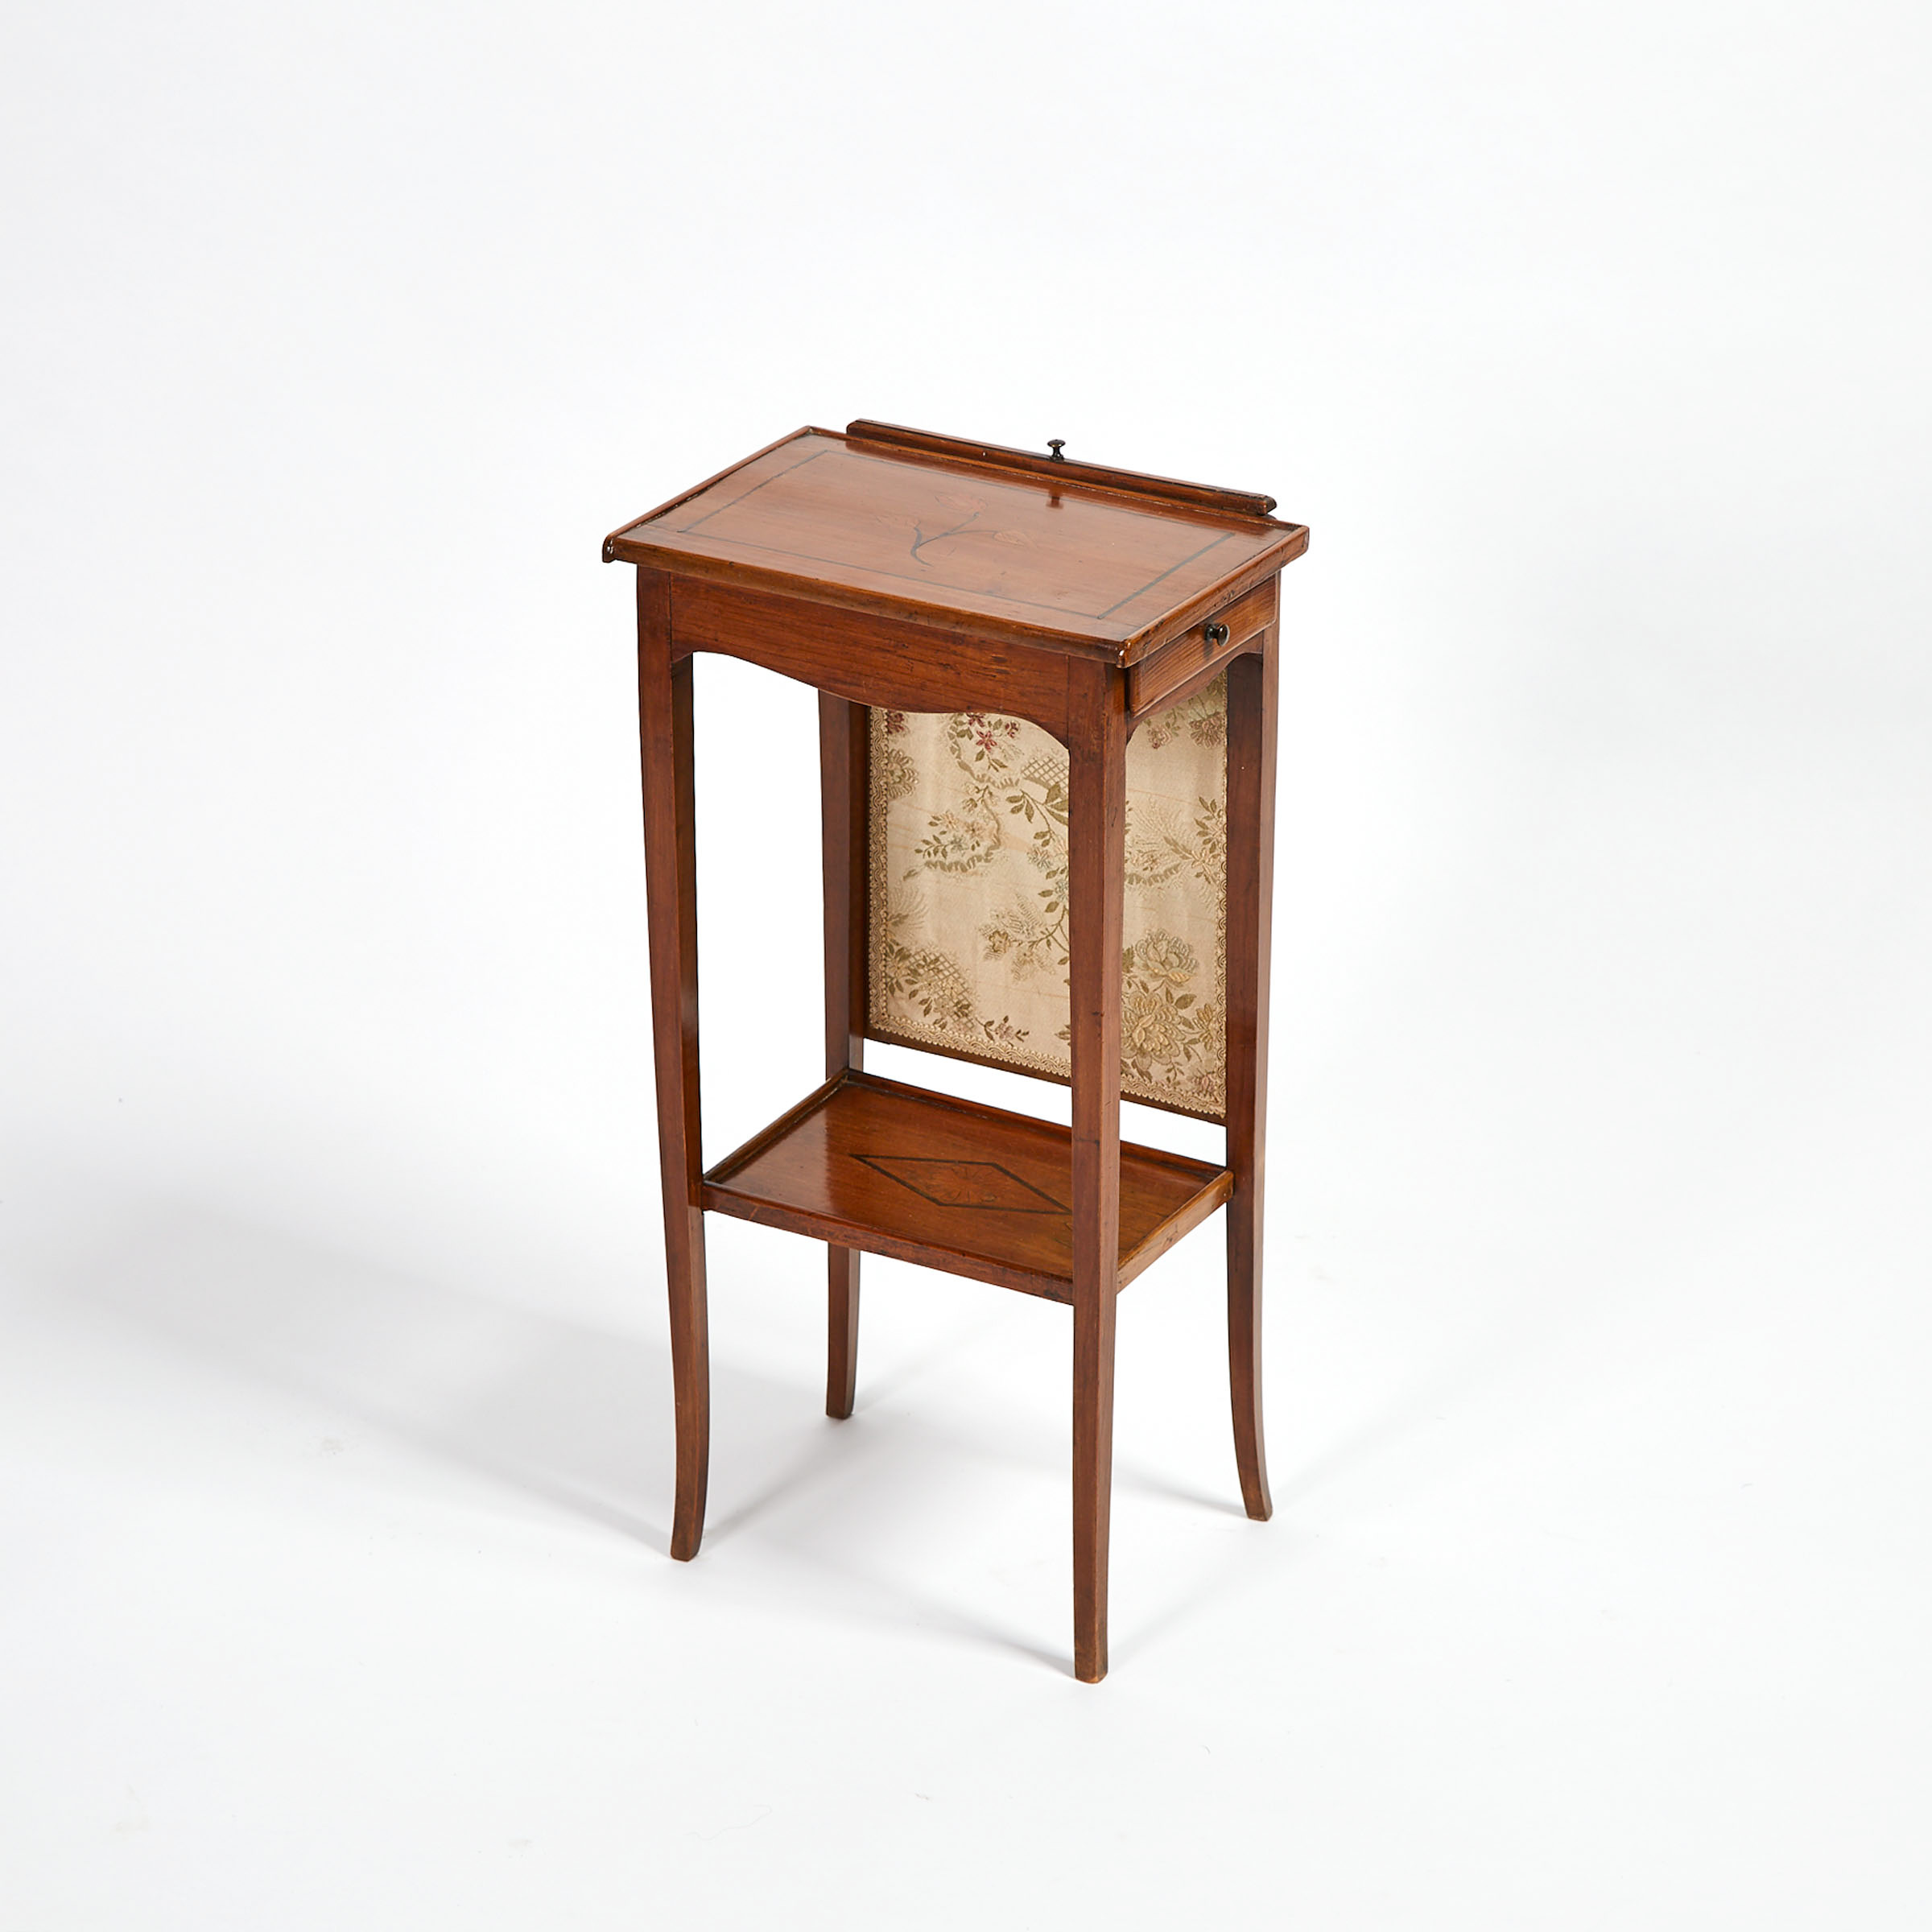 Continental Inlaid Cherry Candlestand with Recessed Fire Screen, 19th century